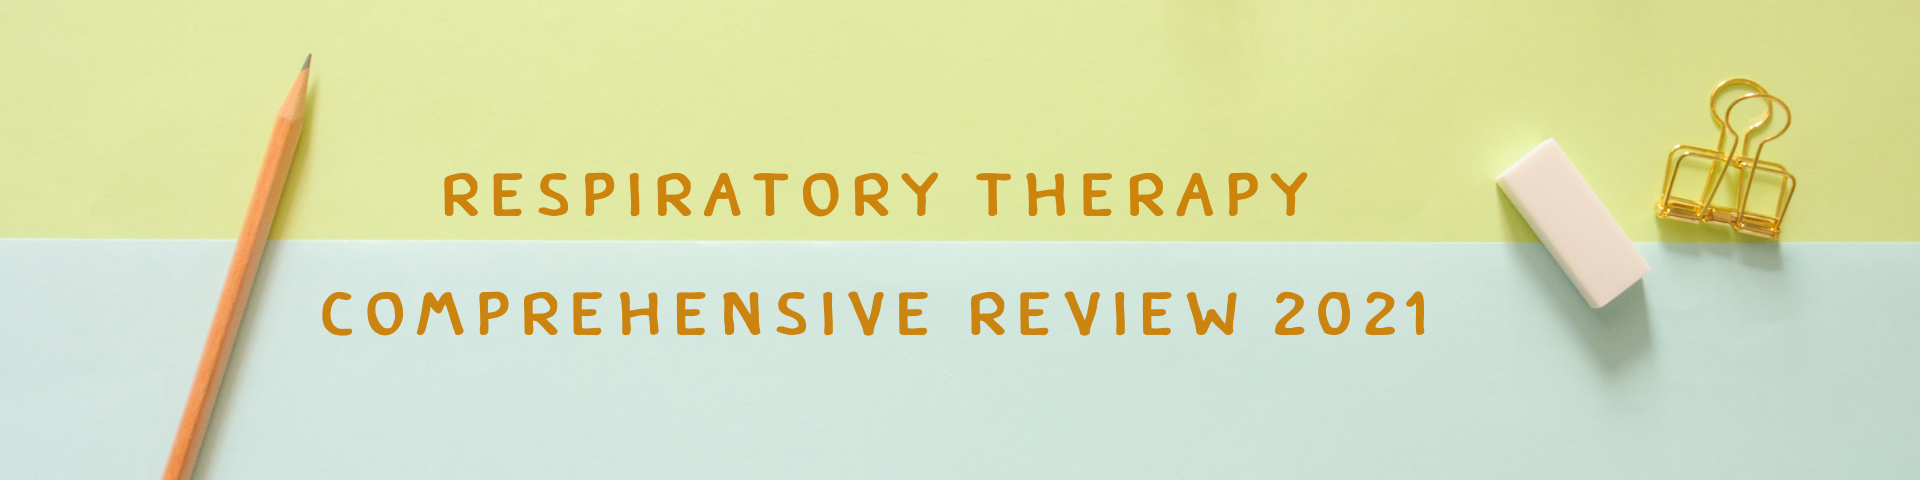 Respiratory Therapy Comprehensive Review 2021